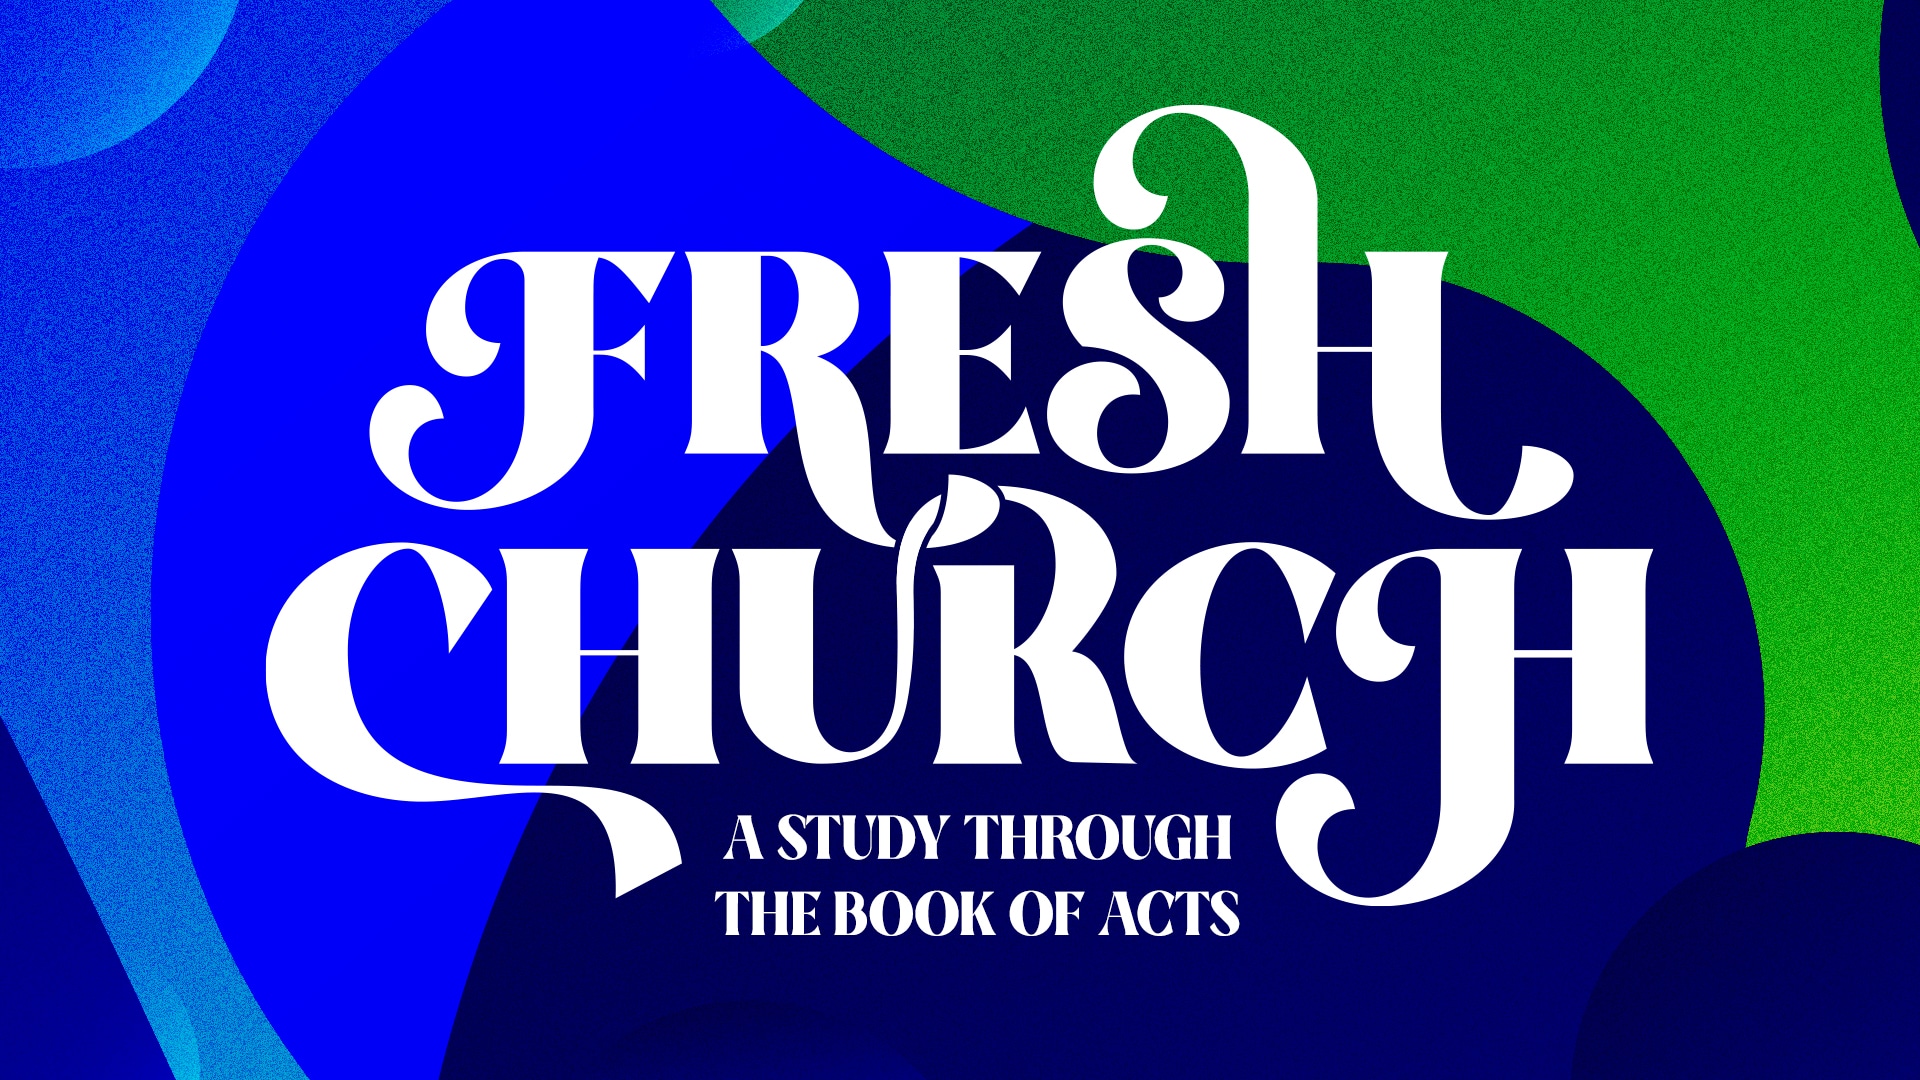 Acts 26: Paul and the King (Fresh Church)